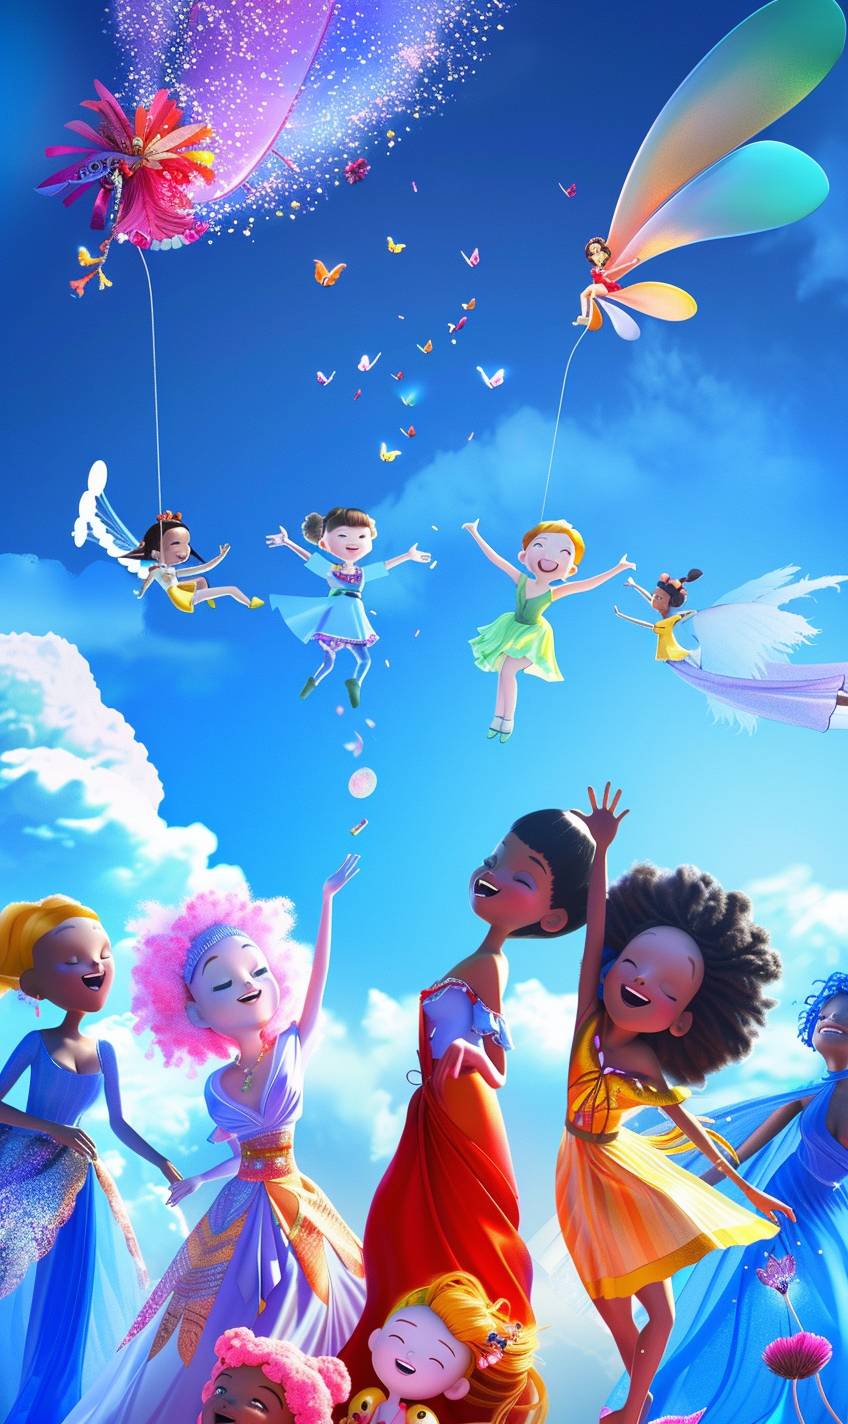 A dynamic and energetic illustration featuring an eclectic mix of characters from different backgrounds, ages, and cultures, coming together to celebrate friendship, diversity, and unity in a vibrant and lively setting. The artwork should exude a sense of inclusivity, joy, and togetherness, portraying a harmonious blend of personalities and styles in a visually compelling and engaging composition.